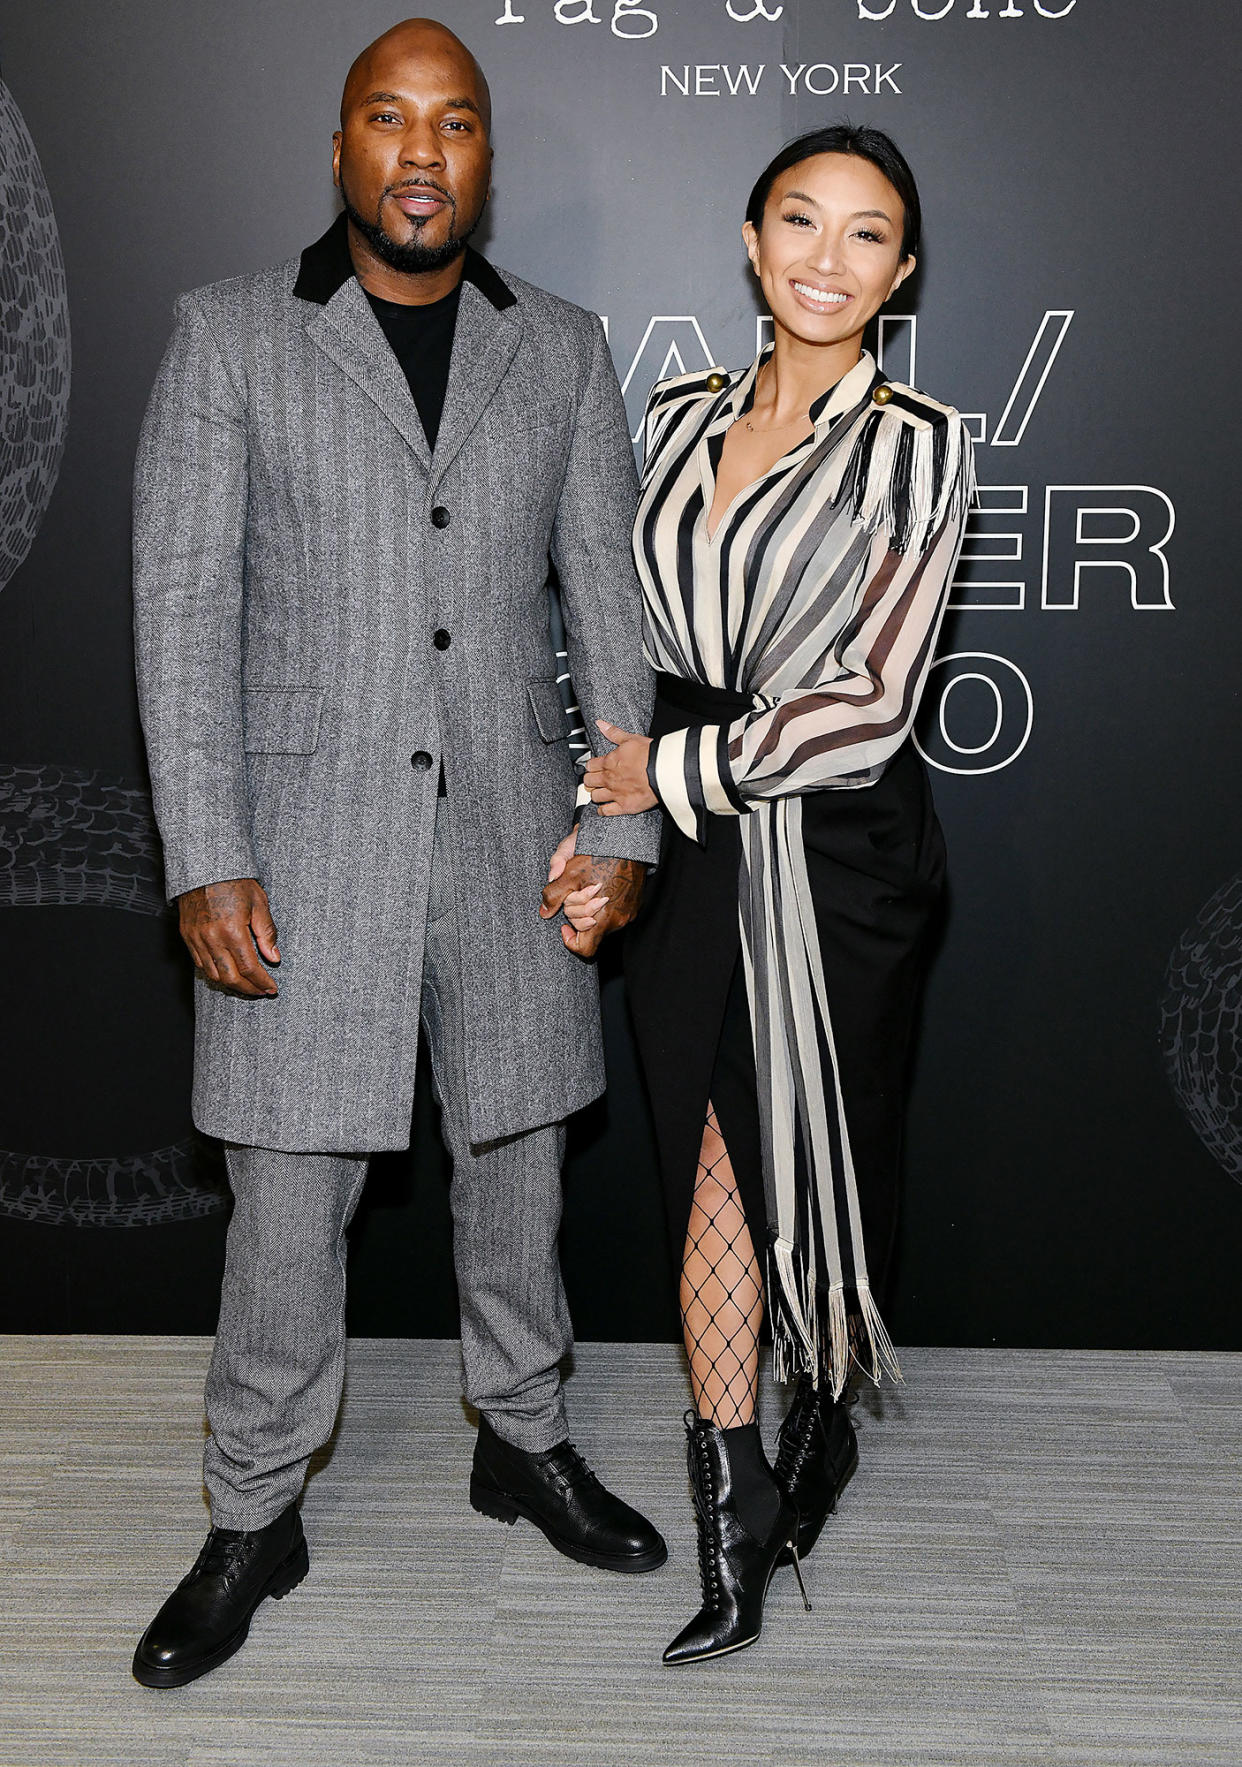 Jeezy Accuses Estranged Wife Jeannie Mai of Being a Gatekeeper' to Daughter Monaco